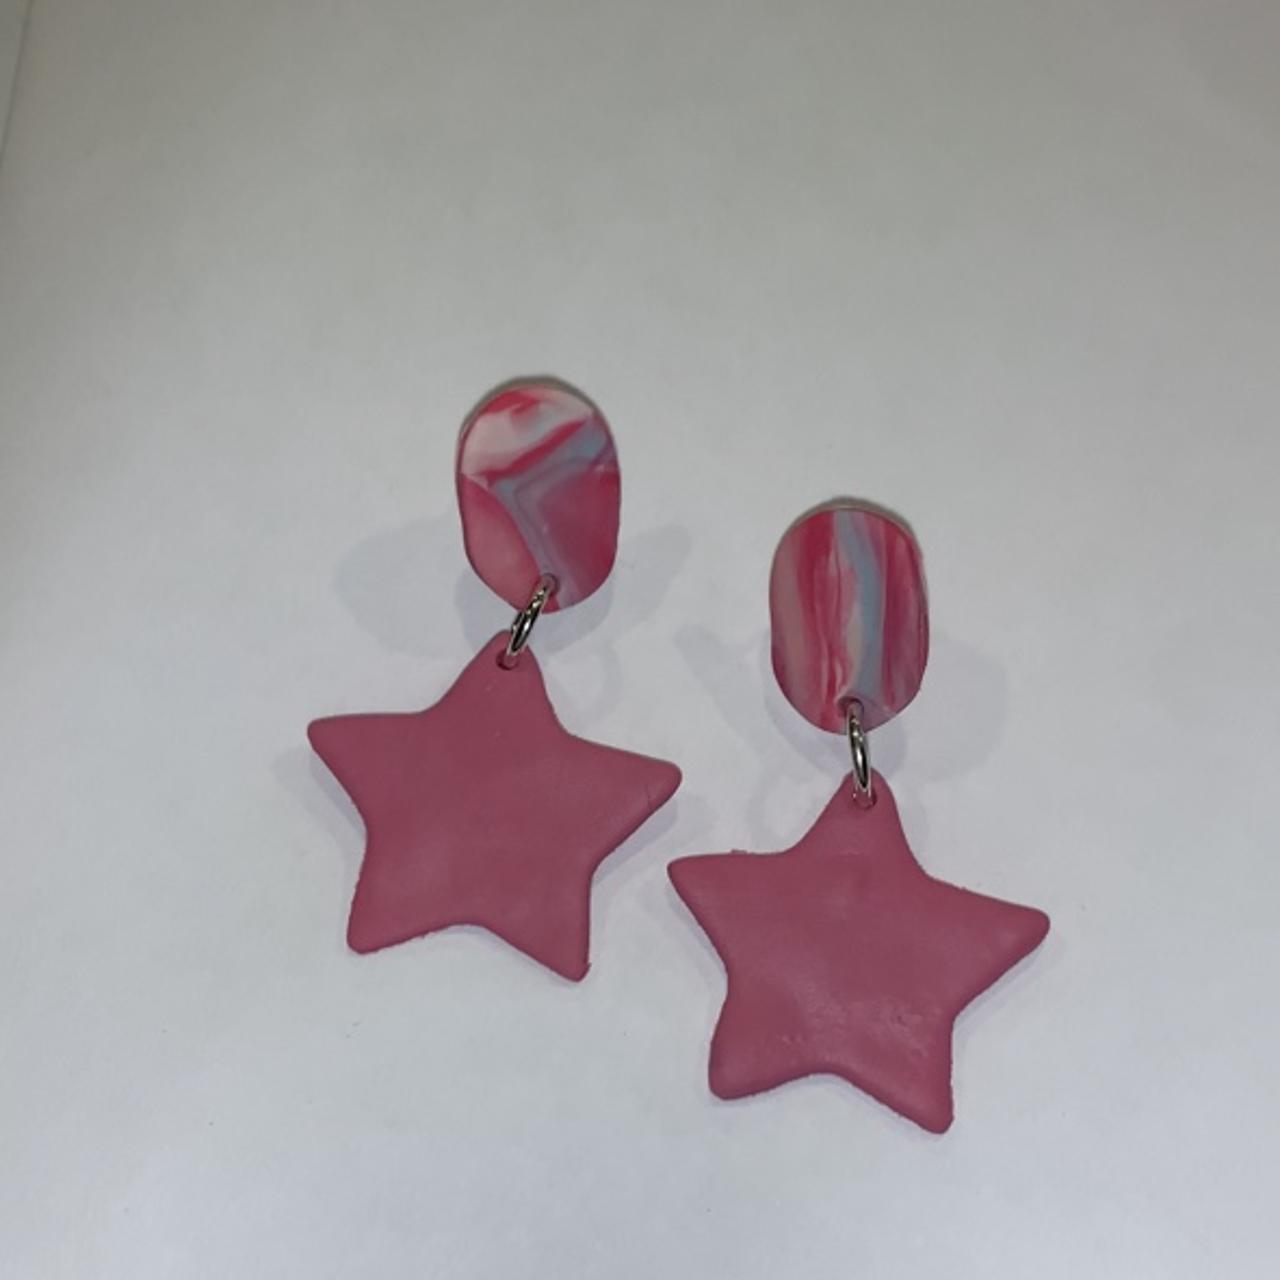 FREE SHIPPING! Polymer clay earrings